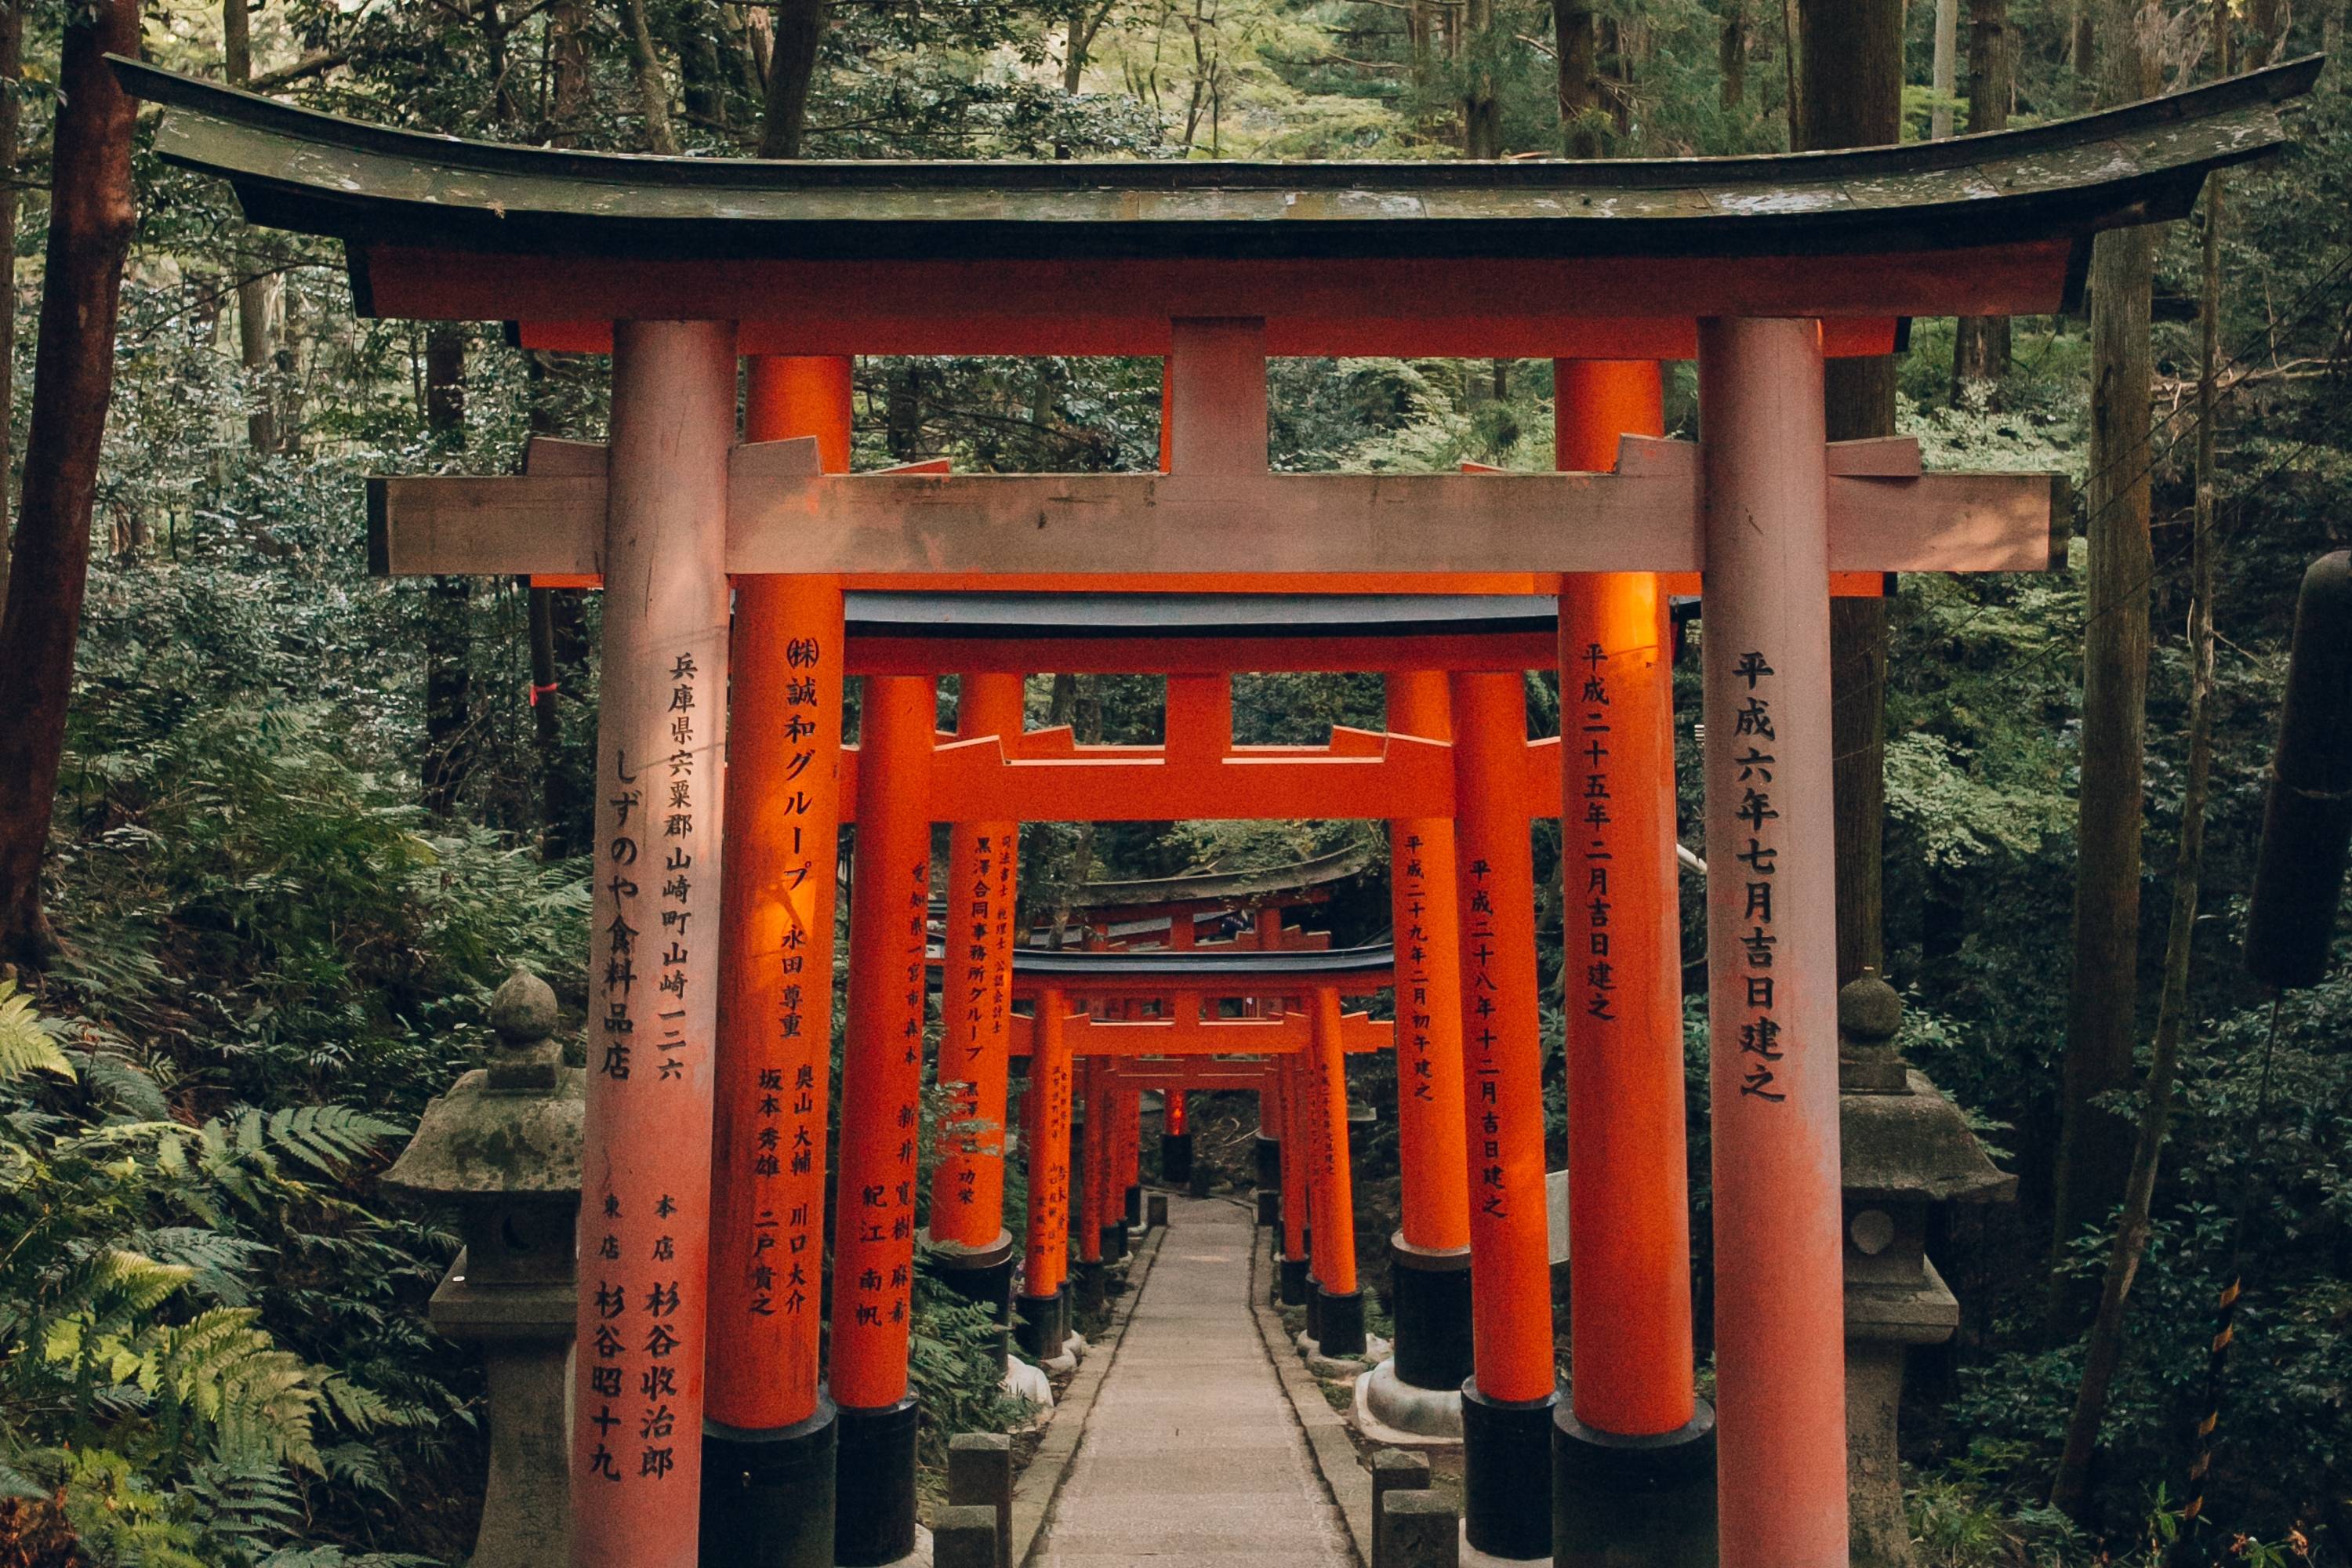 The Fushimi Inari Taisha shrine in Kyoto is one of Japan's most photogenic places to visit. | COURTESY OF HAARKON ADVENTURES